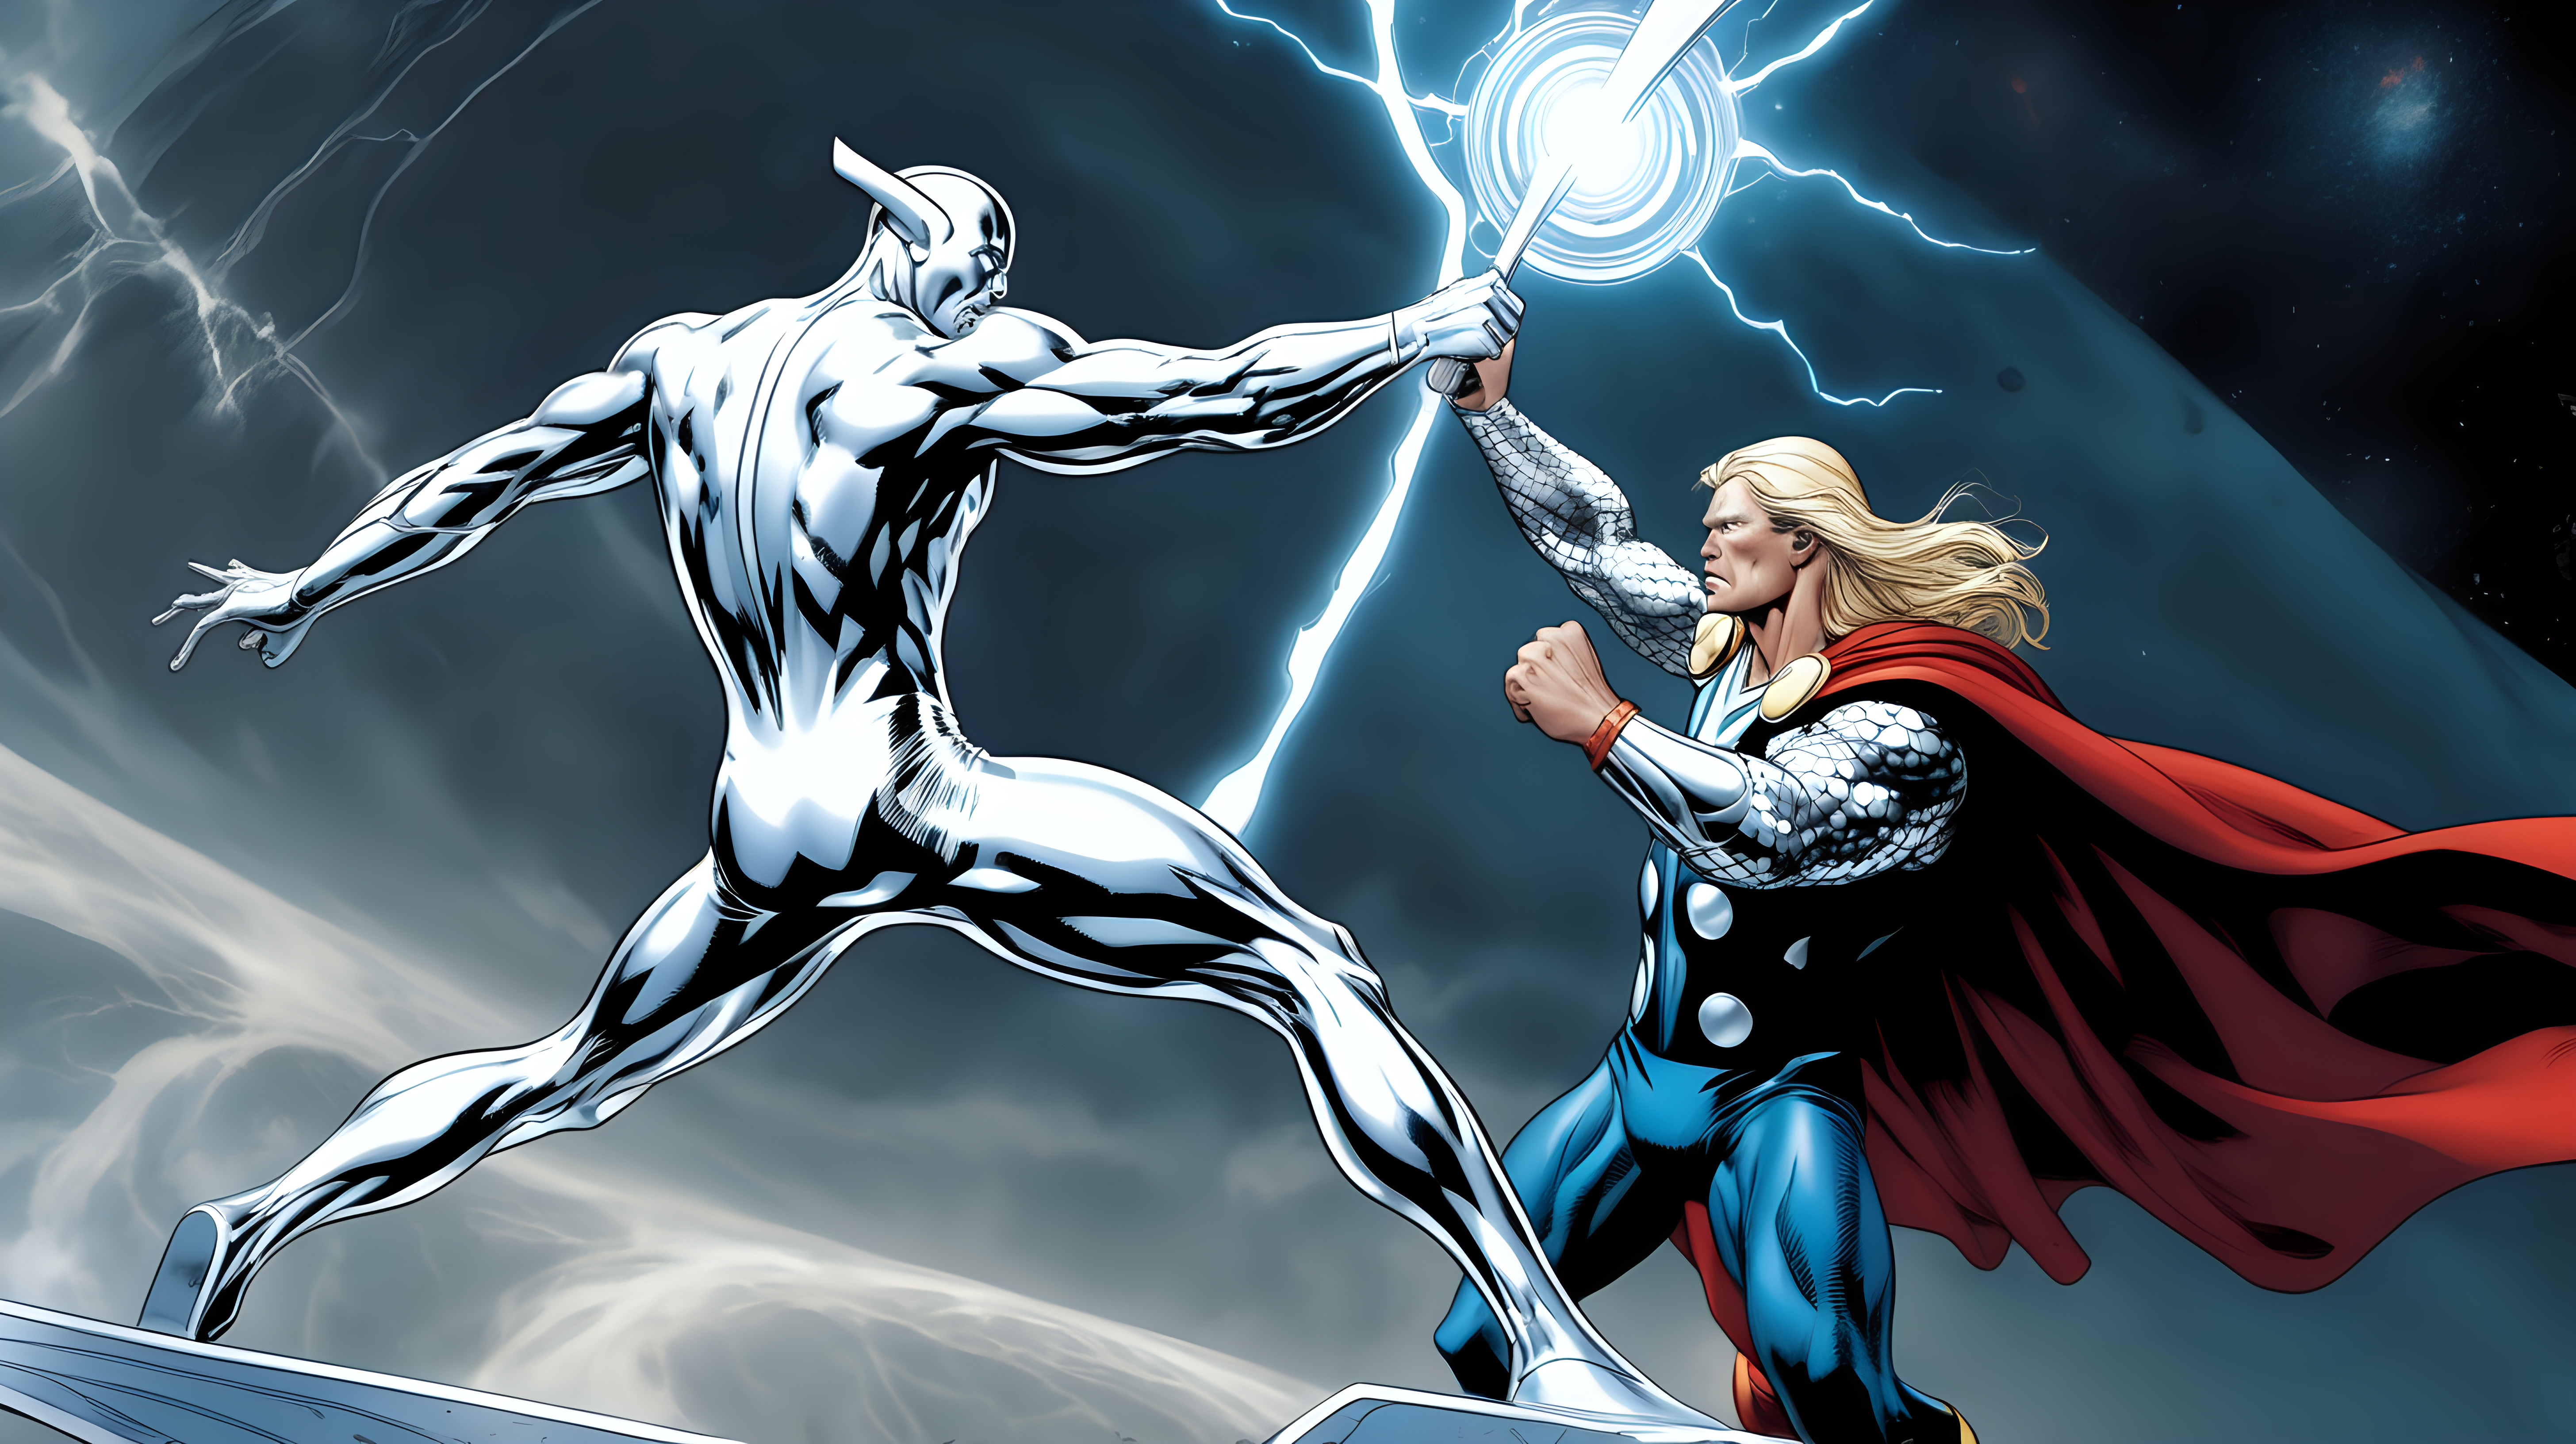 The Silver Surfer fighting Thor on Asgard